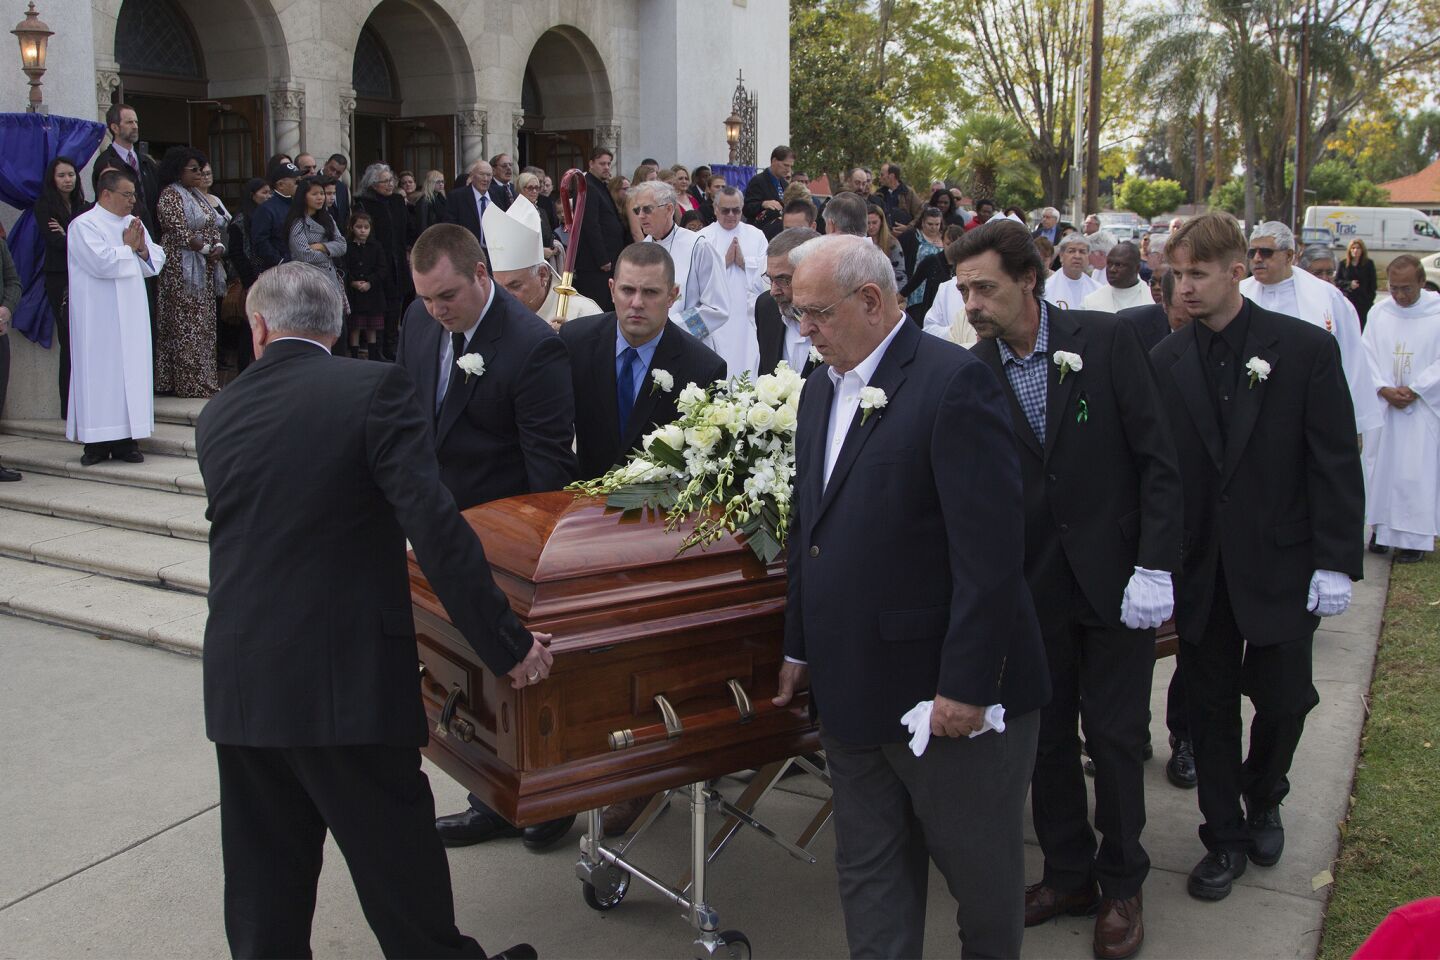 Pallbearers escort the casket of Damian Meins at St. Catherine of Alexandria church in Riverside.